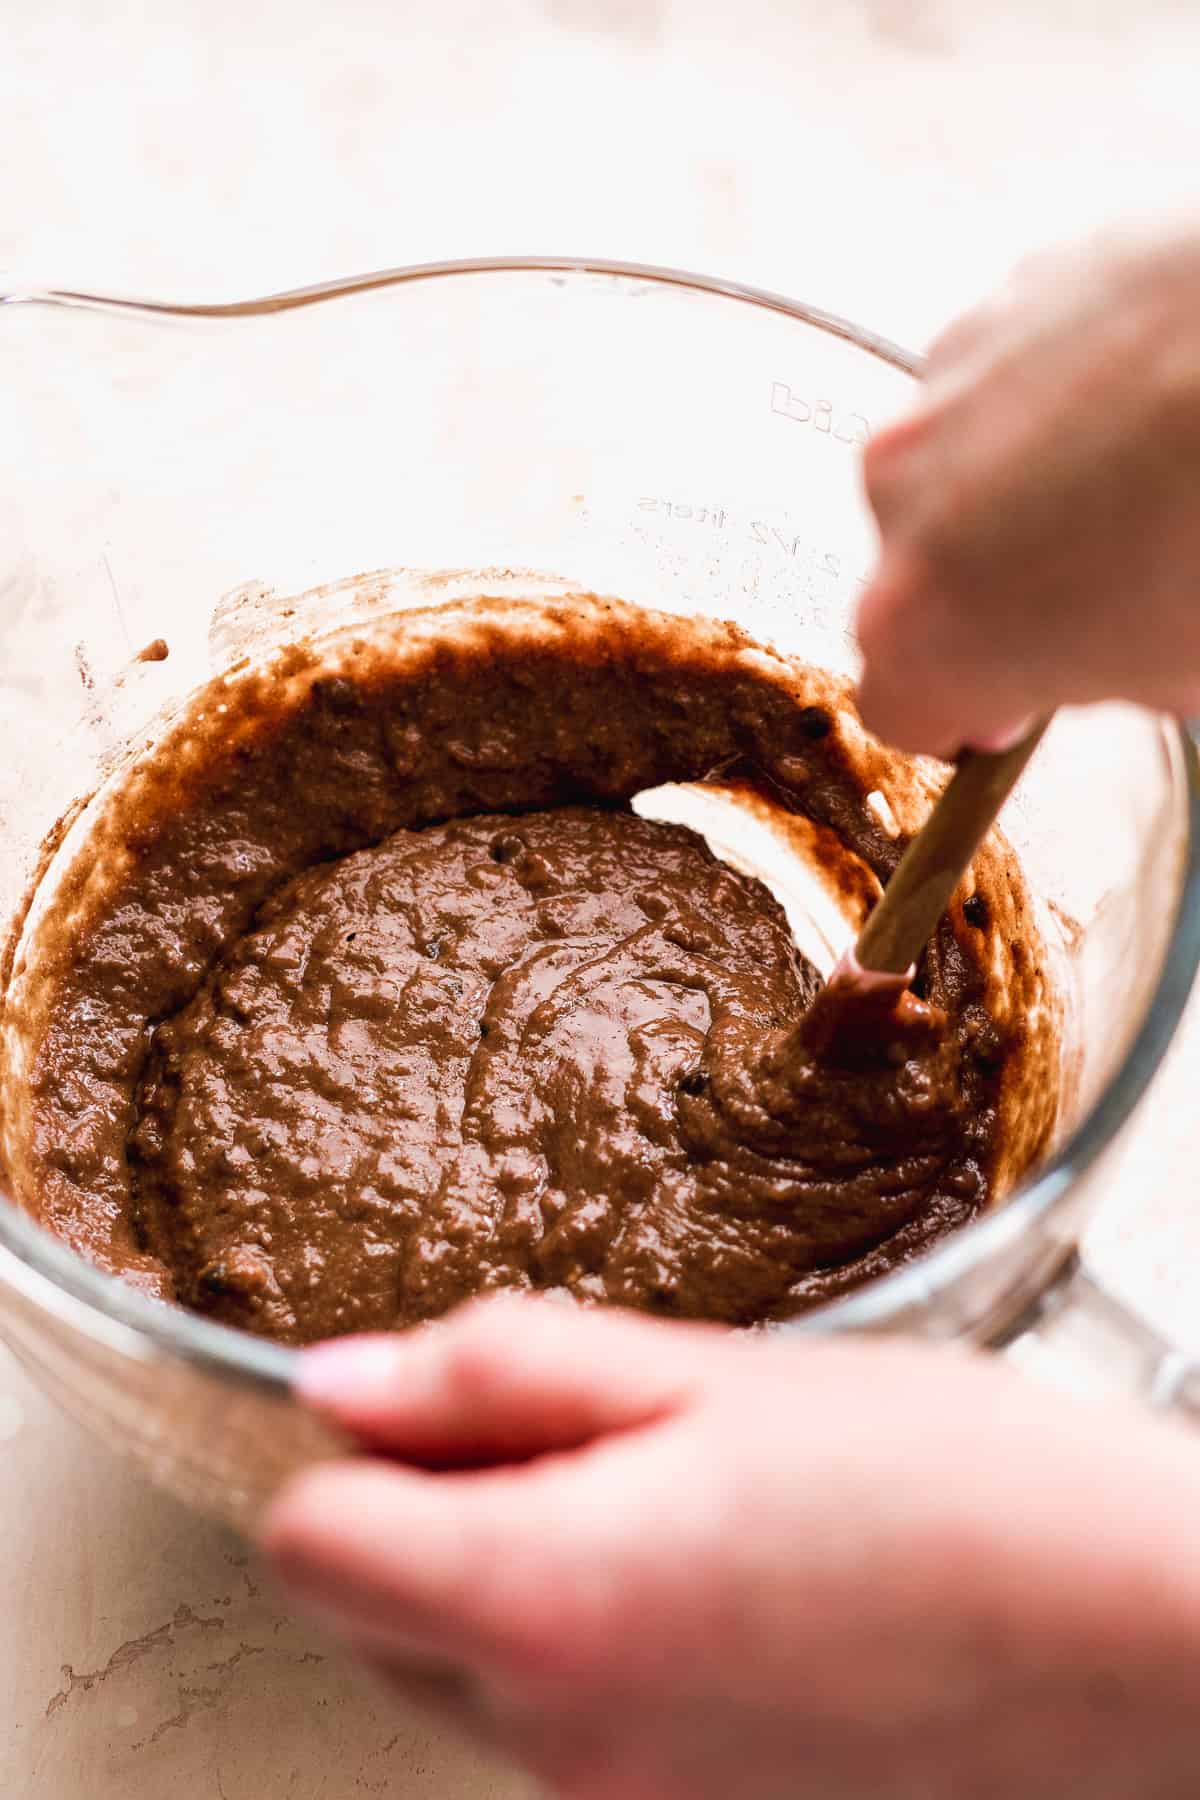 Hand mixing a chocolate batter in a glass bowl.